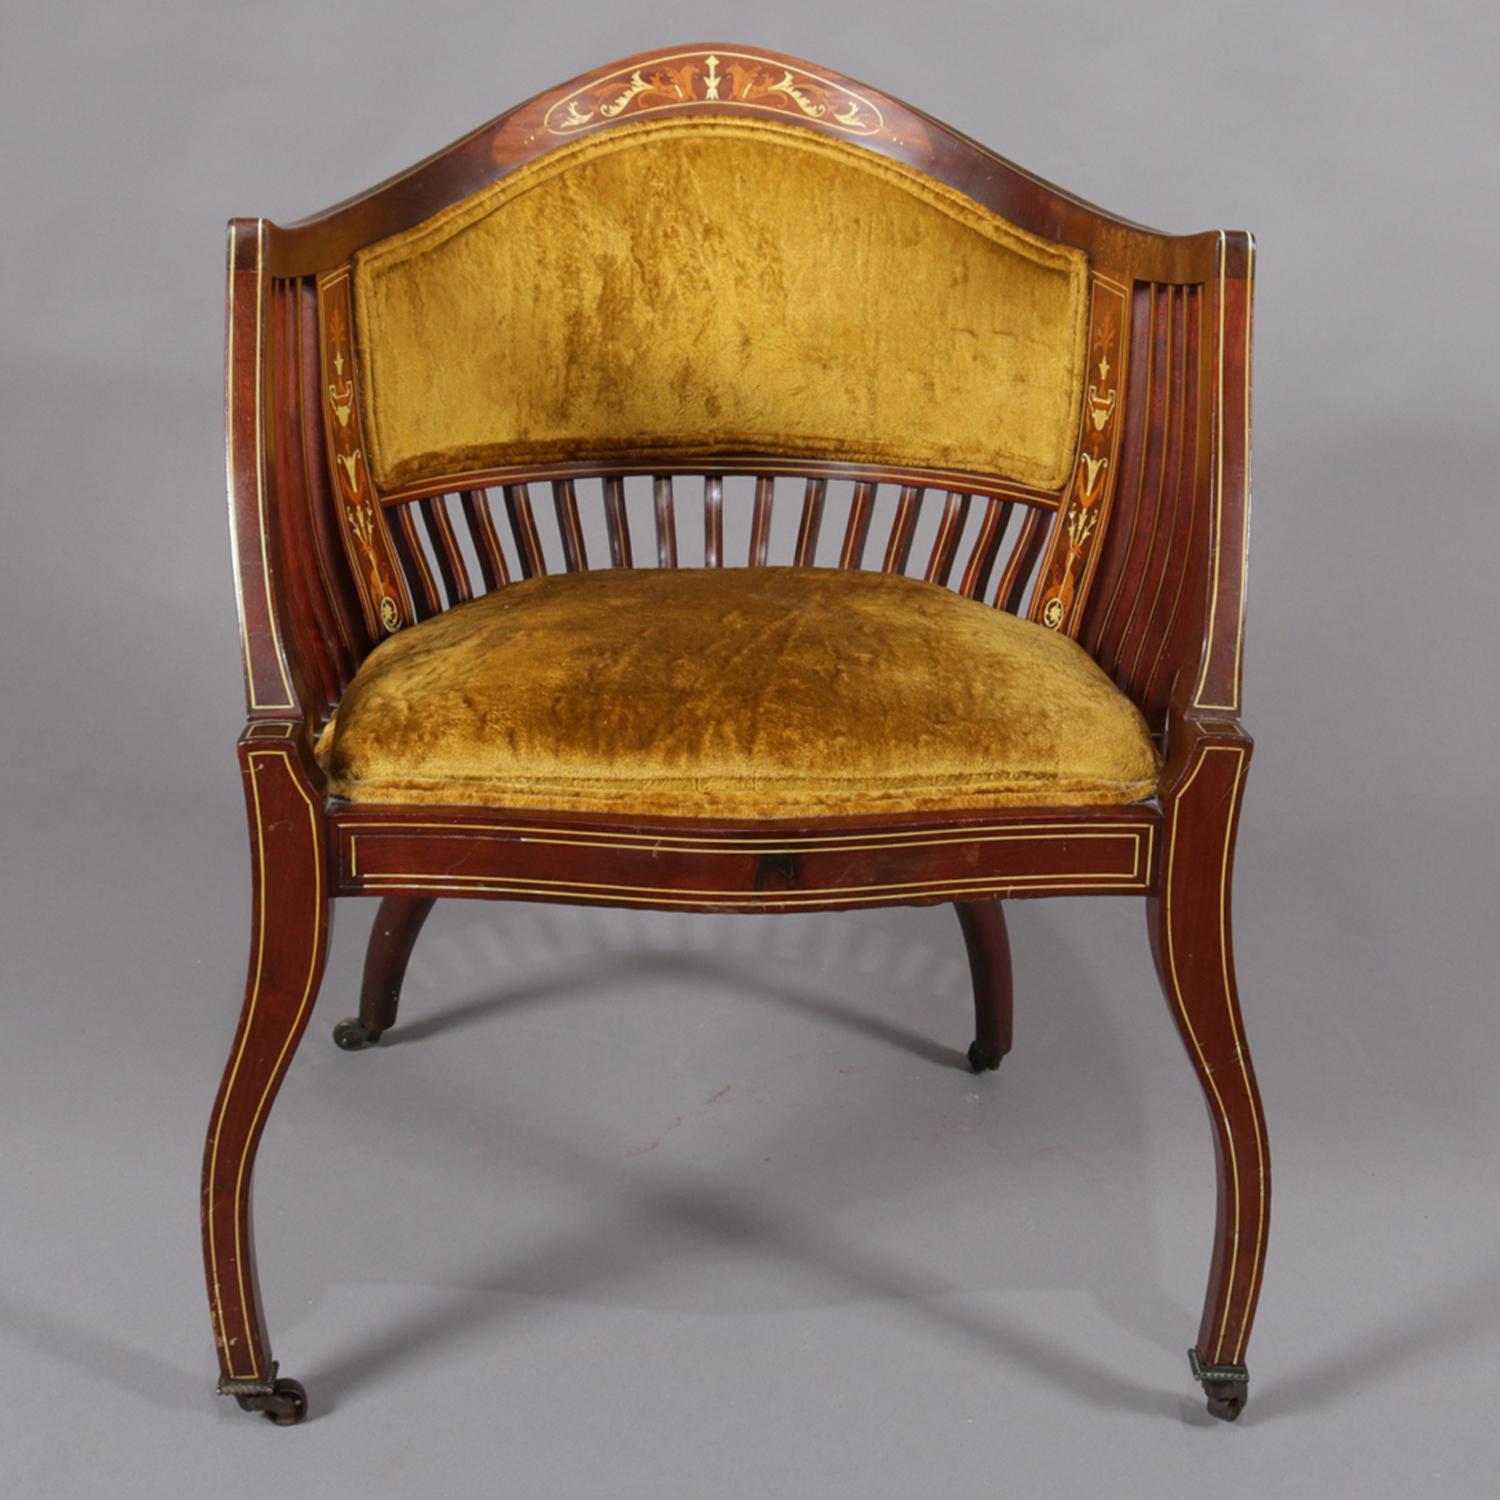 Antique Italian Neoclassical Satinwood Marquetry Inlaid Side Chair, circa 1890 1